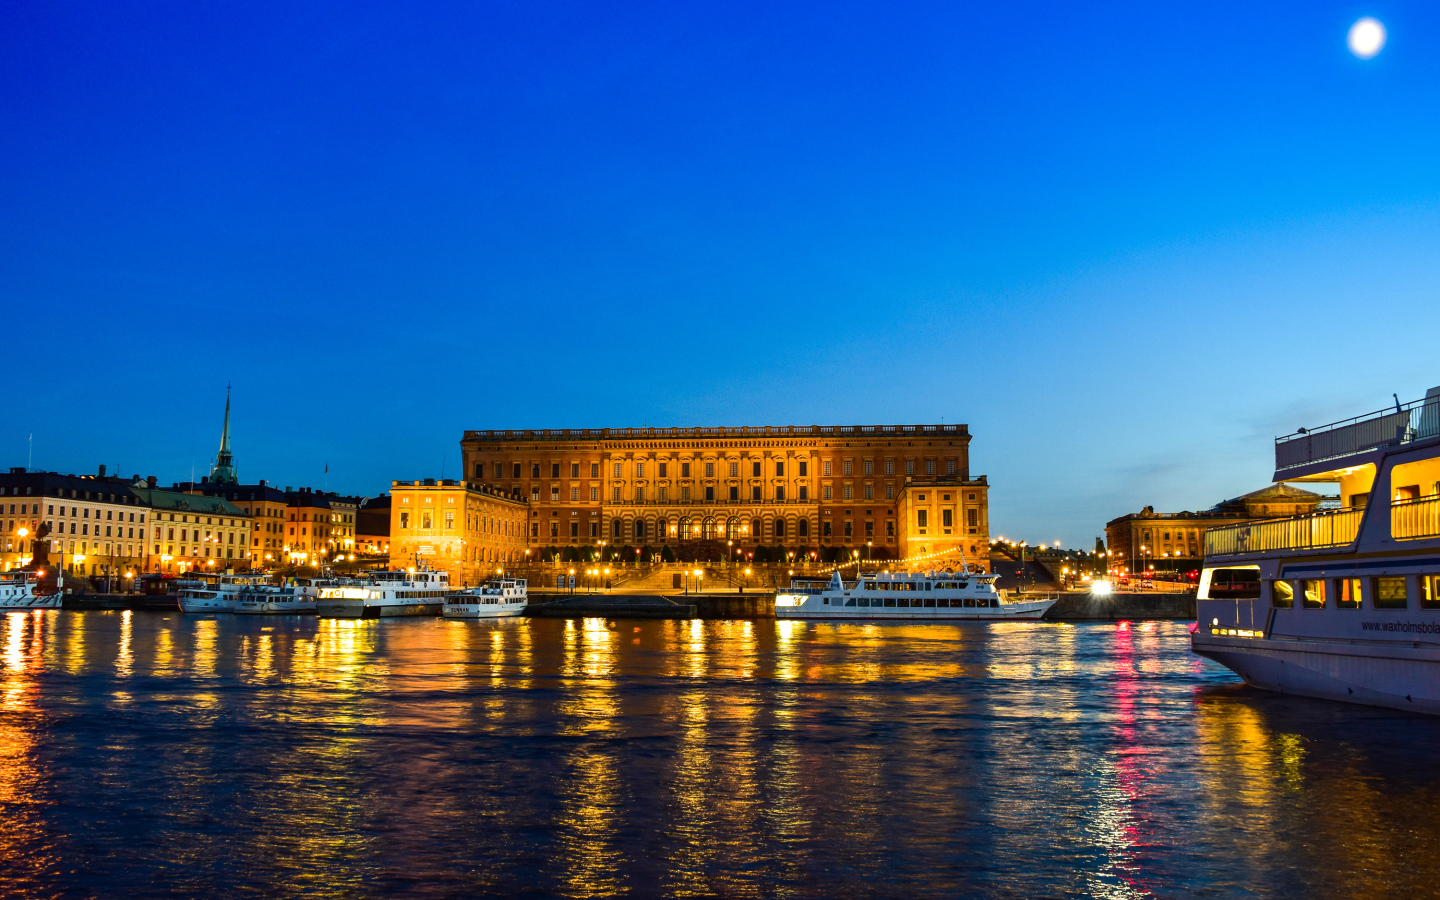 The palace is reflected in the water in the evening, Stockholm. Sweden